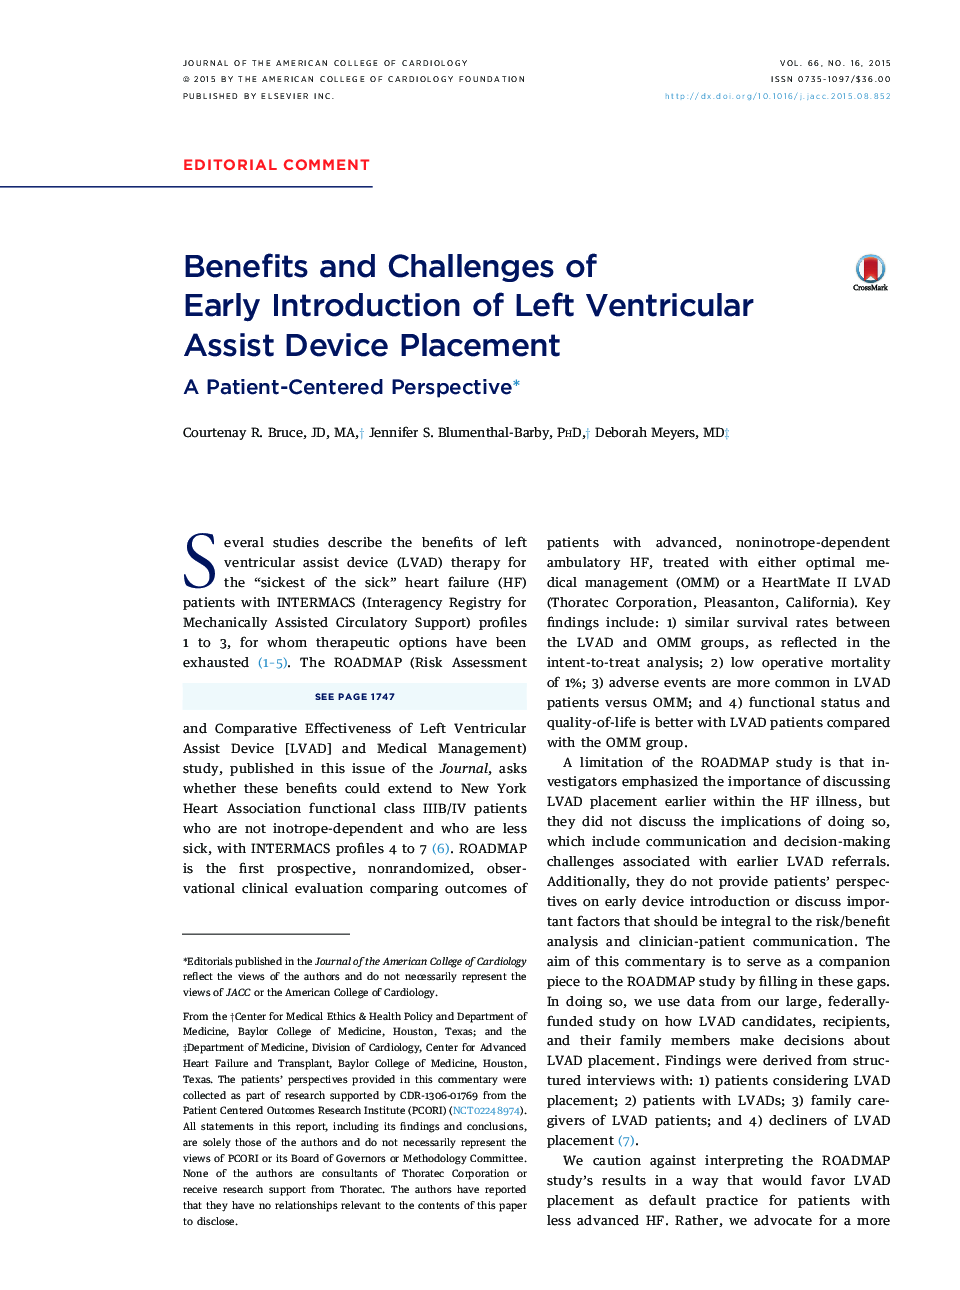 Benefits and Challenges of Early Introduction of Left Ventricular AssistÂ Device Placement